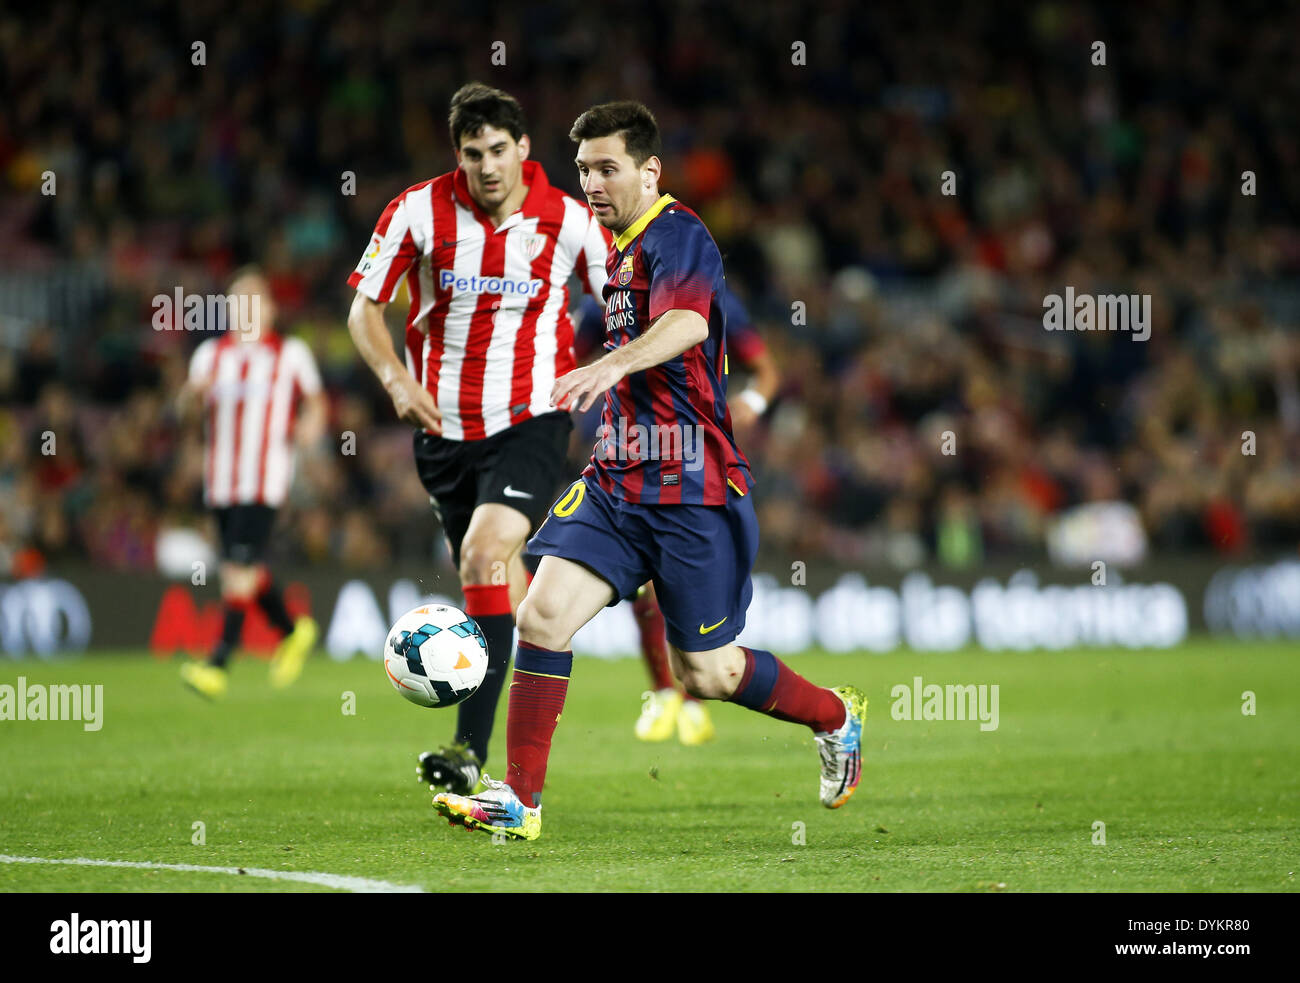 Barcelona, Spain. 20th Apr, 2014. BARCELONA-SPAIN -20 April. Leo Messi in the match between FC Barcelona and Athletic Bilbao, for Week 34 of the spanish League played at the Camp Nou on April 20, 2014 Photo: Aline Delfim/Urbanandsport/NurPhoto © Aline Delfim/NurPhoto/ZUMAPRESS.com/Alamy Live News Stock Photo